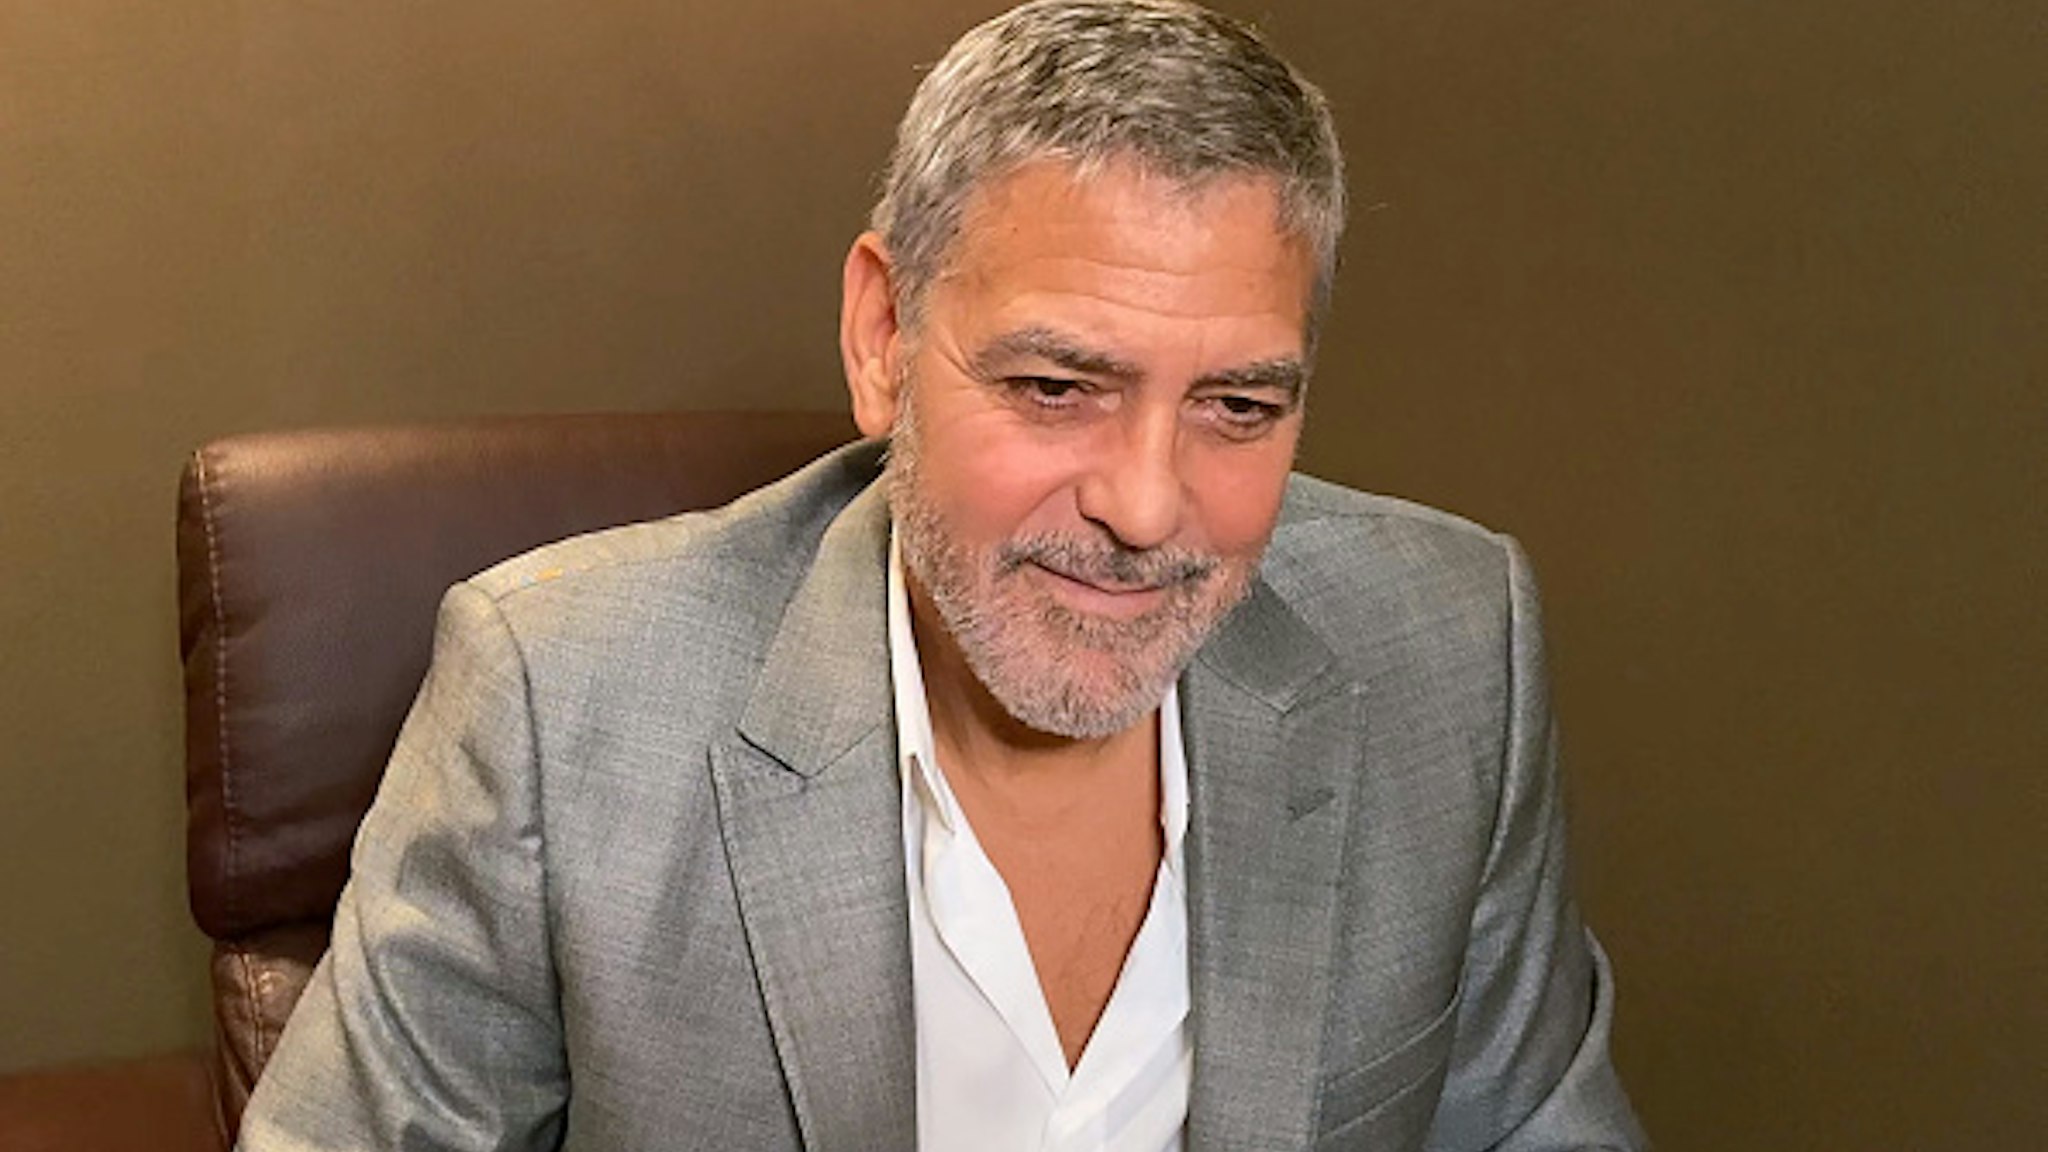 UNSPECIFIED - OCTOBER 18: In this screengrab, George Clooney speaks virtually during Screen Talk at the 64th BFI London Film Festival on October 18, 2020.